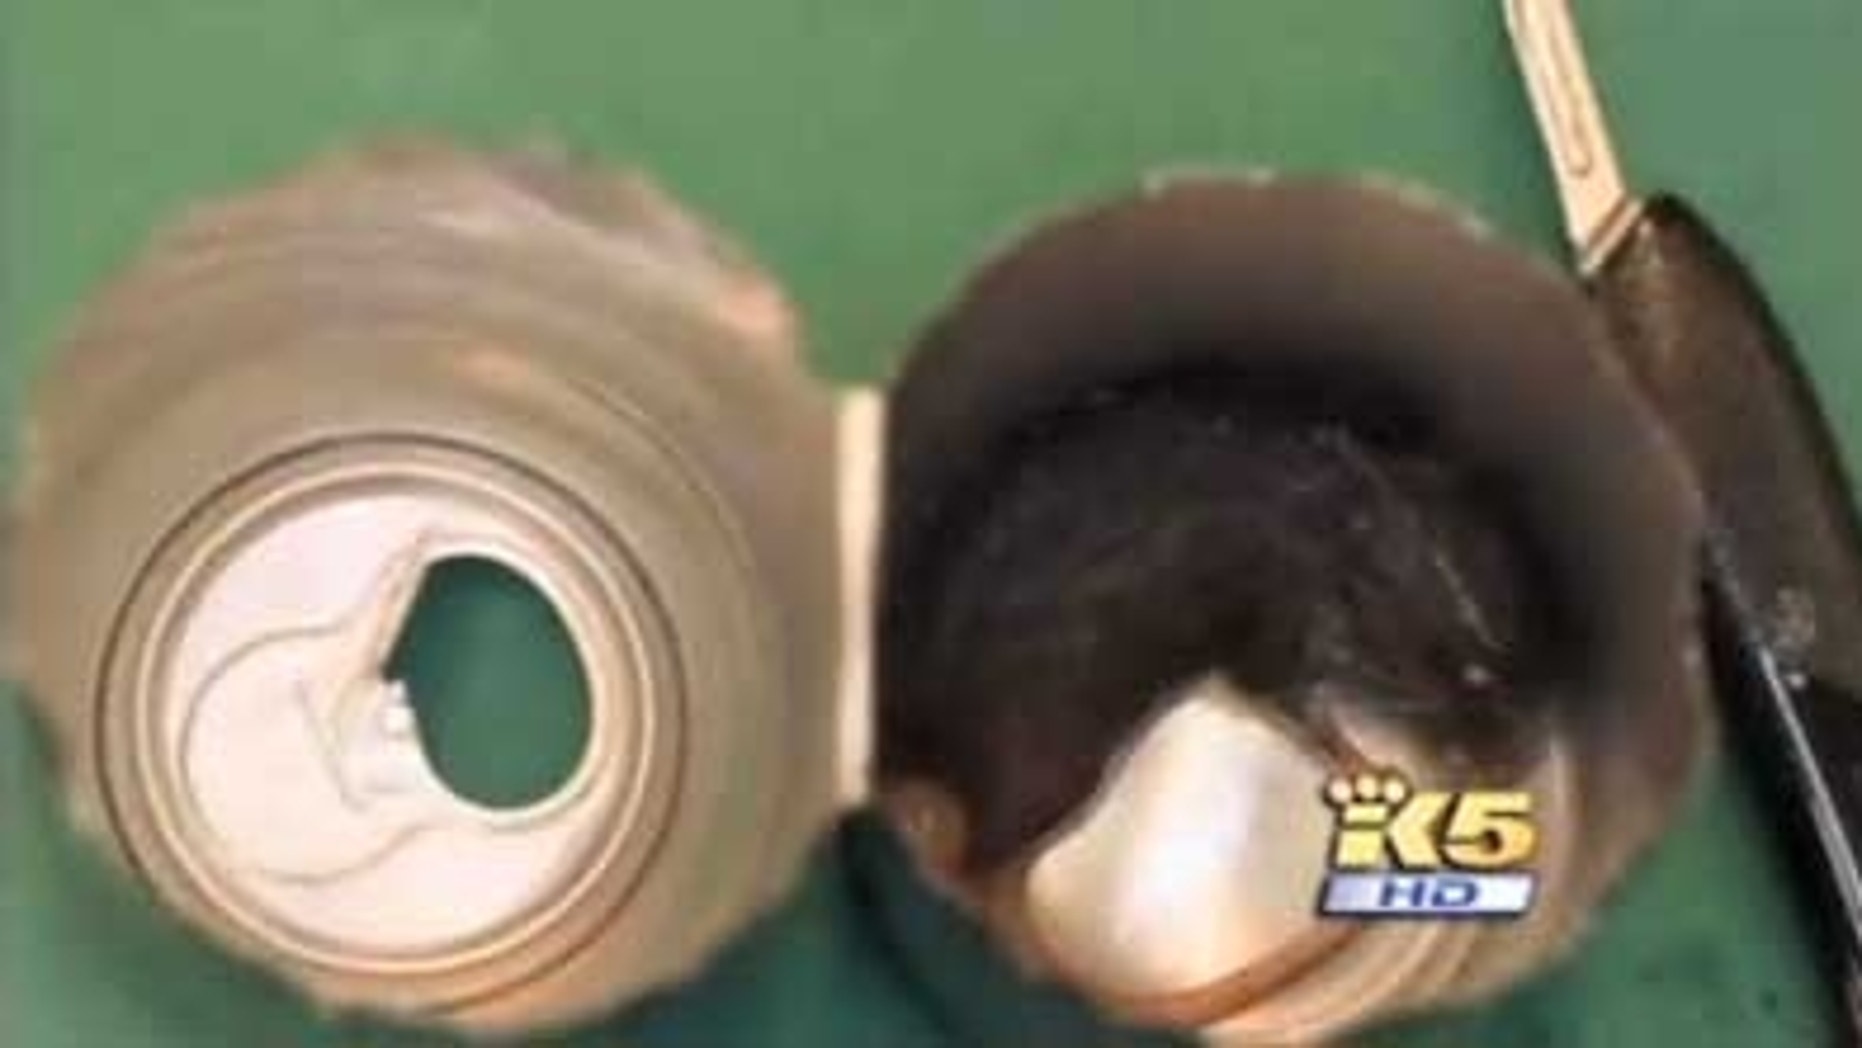 Washington Man Finds Dead Mouse In Energy Drink Can Fox News 